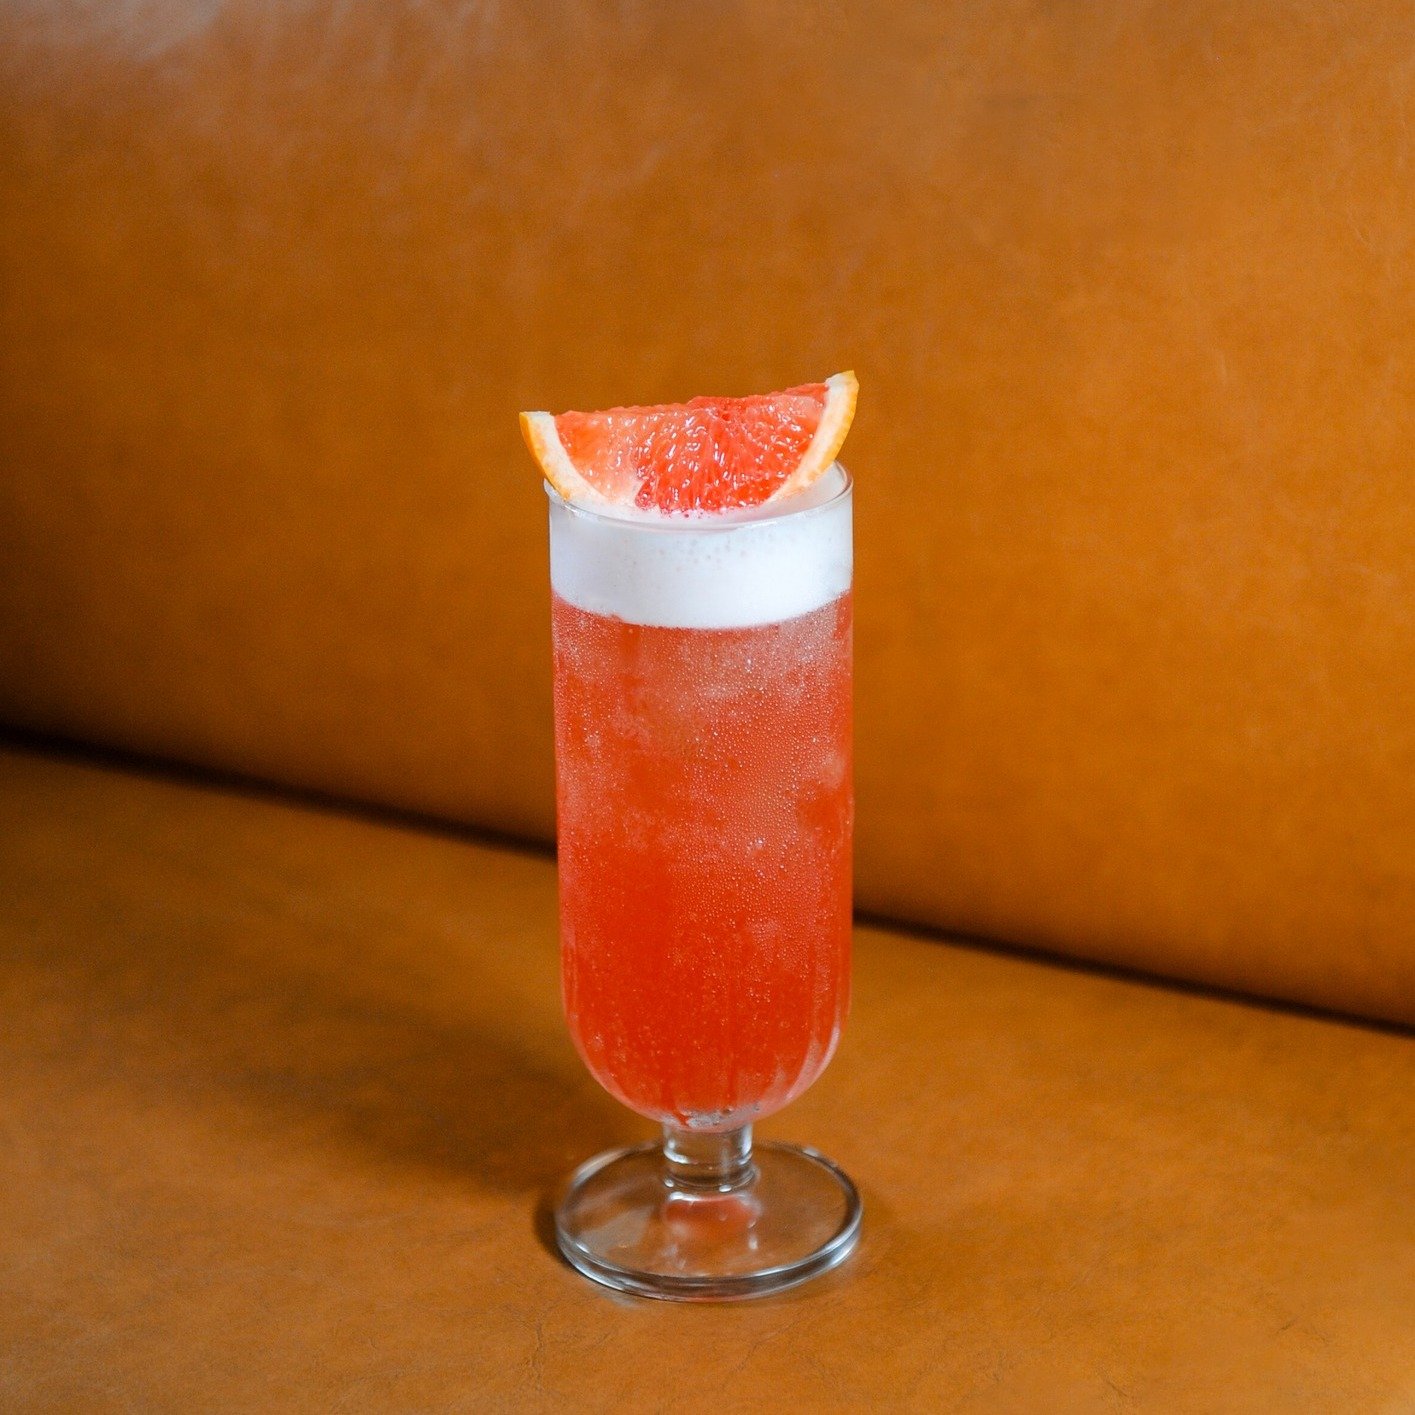 Spumoni - a classic cocktail with Japanese origins but with the iconic red Italian bitter, Campari, at its base. 

At Caffe Fernet, our Spumoni boasts the beautiful rosy hue and the pleasantly bitter backbone is balanced with grapefruit juice and a s